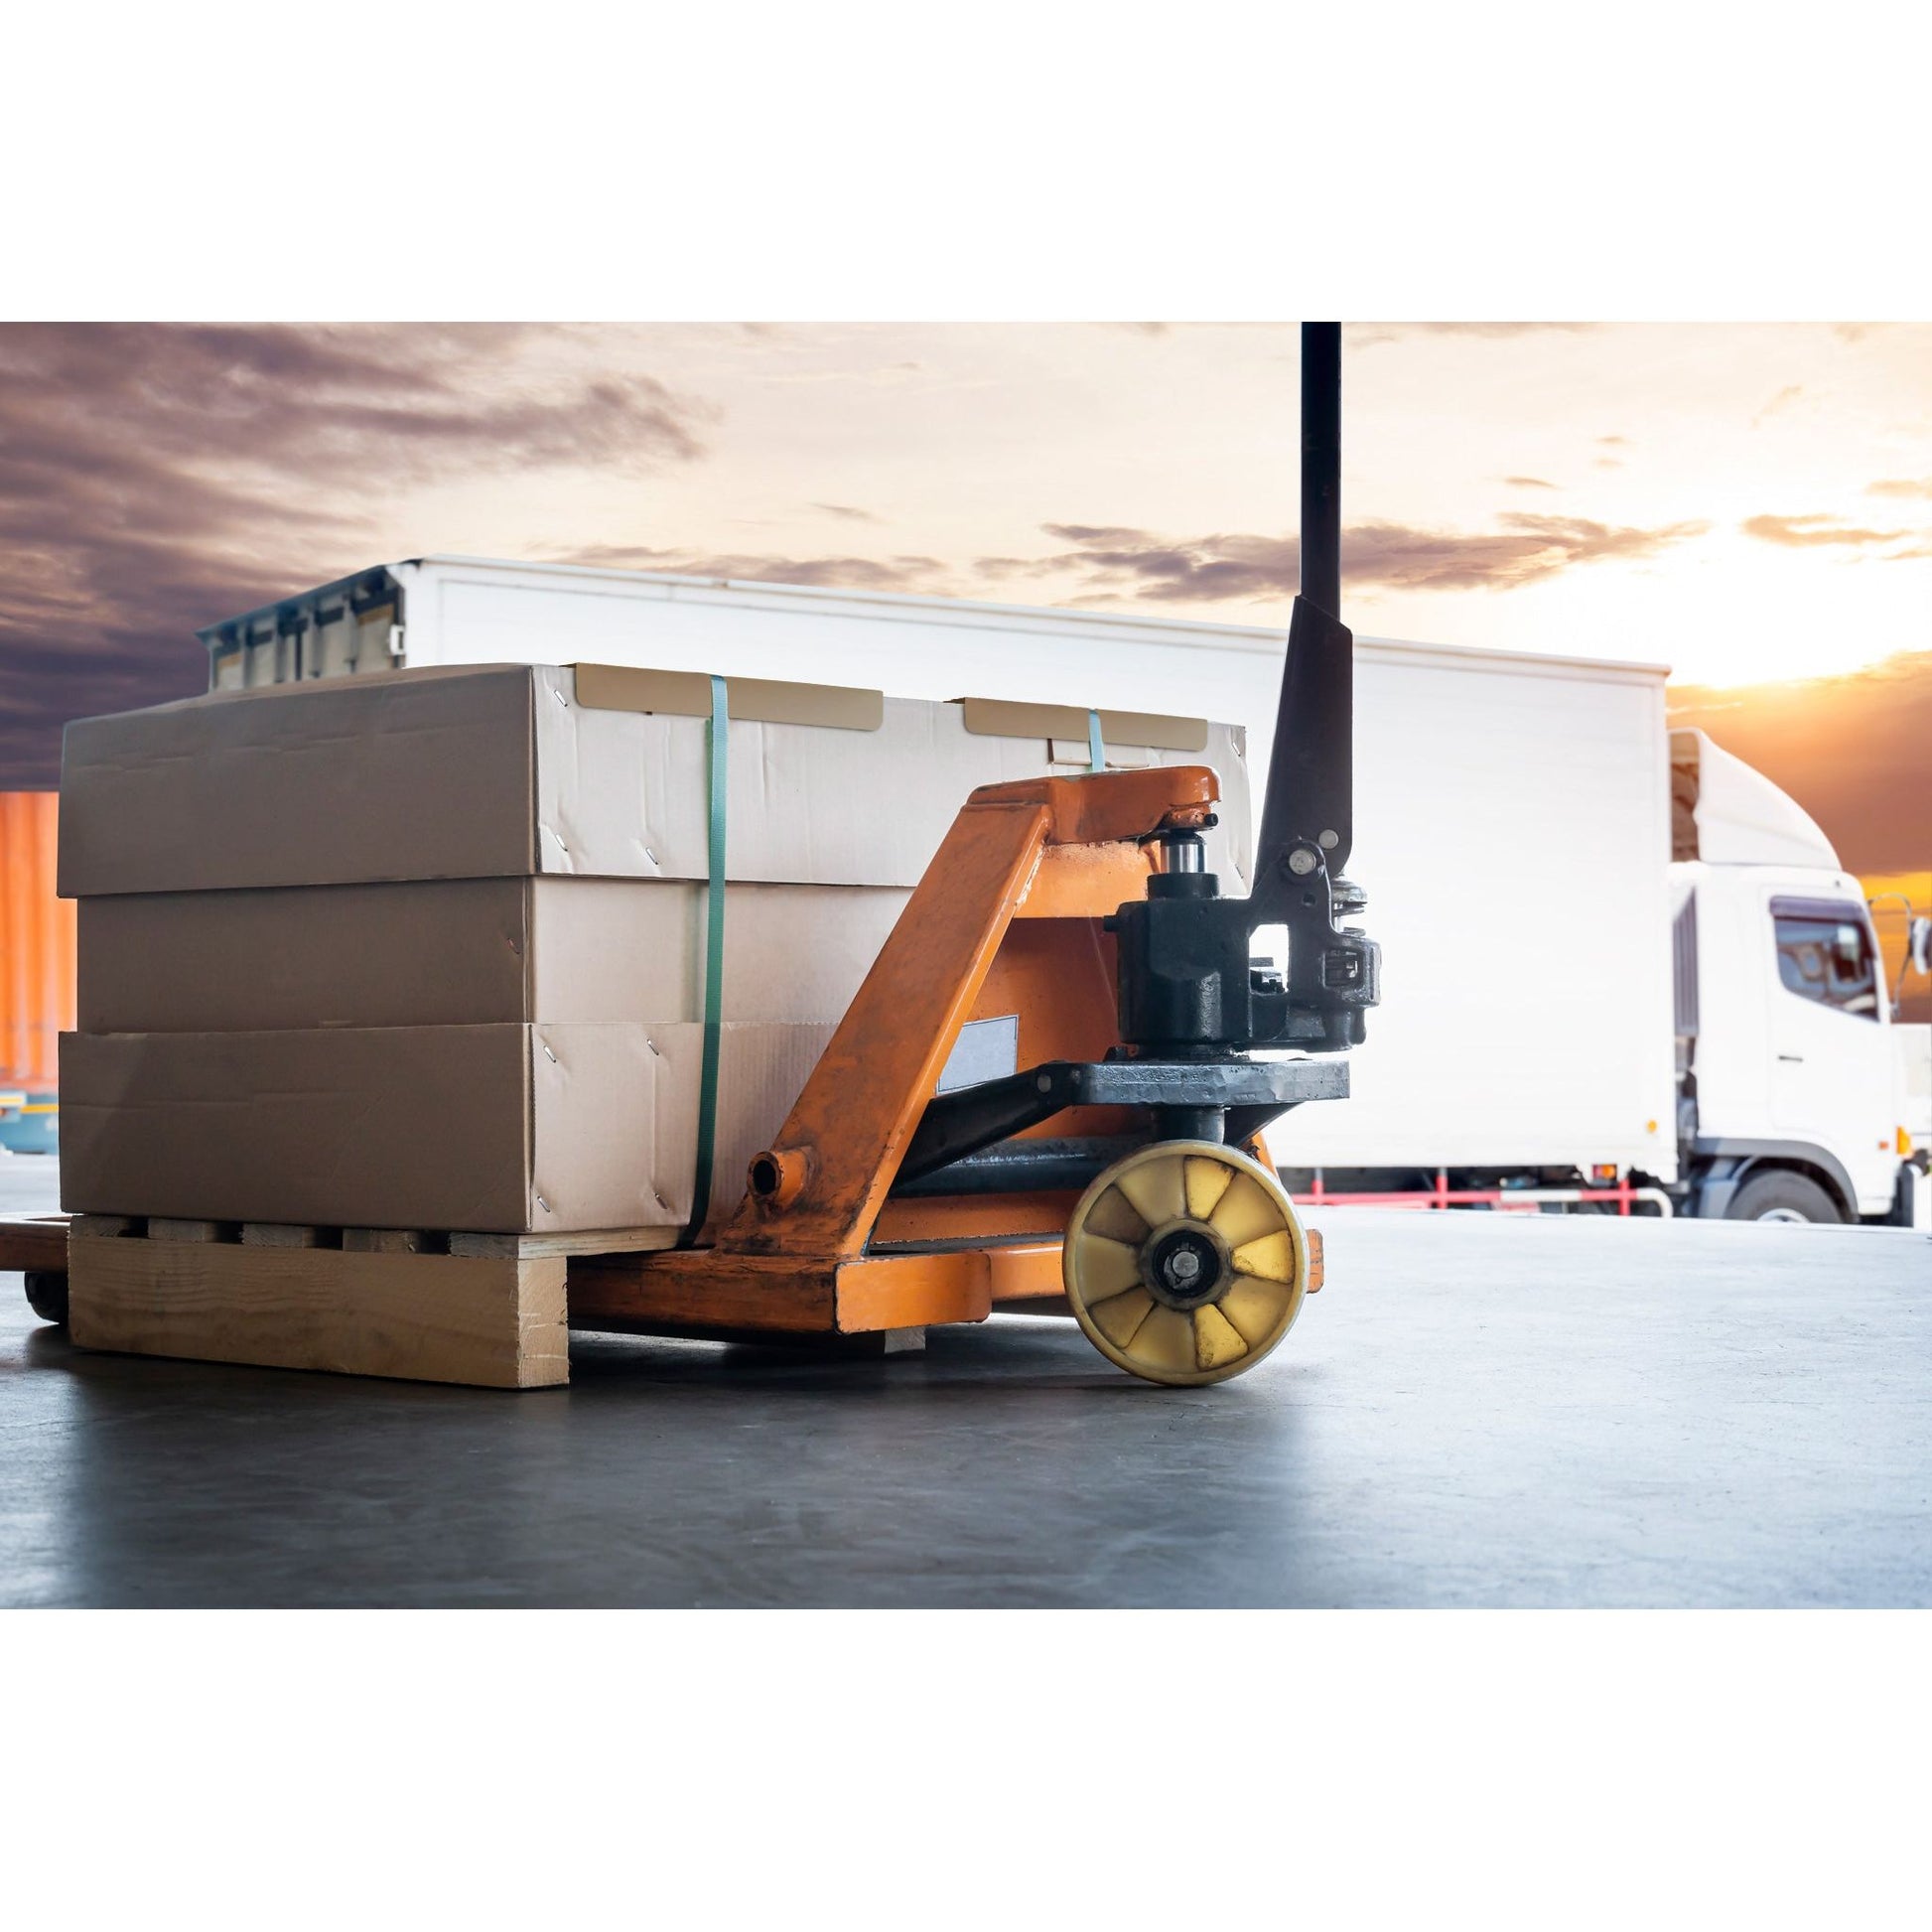 hand-pallet-truck-with-package-box-loading-with-cargo-truck-shipment-cargo-freight-logistics (1)